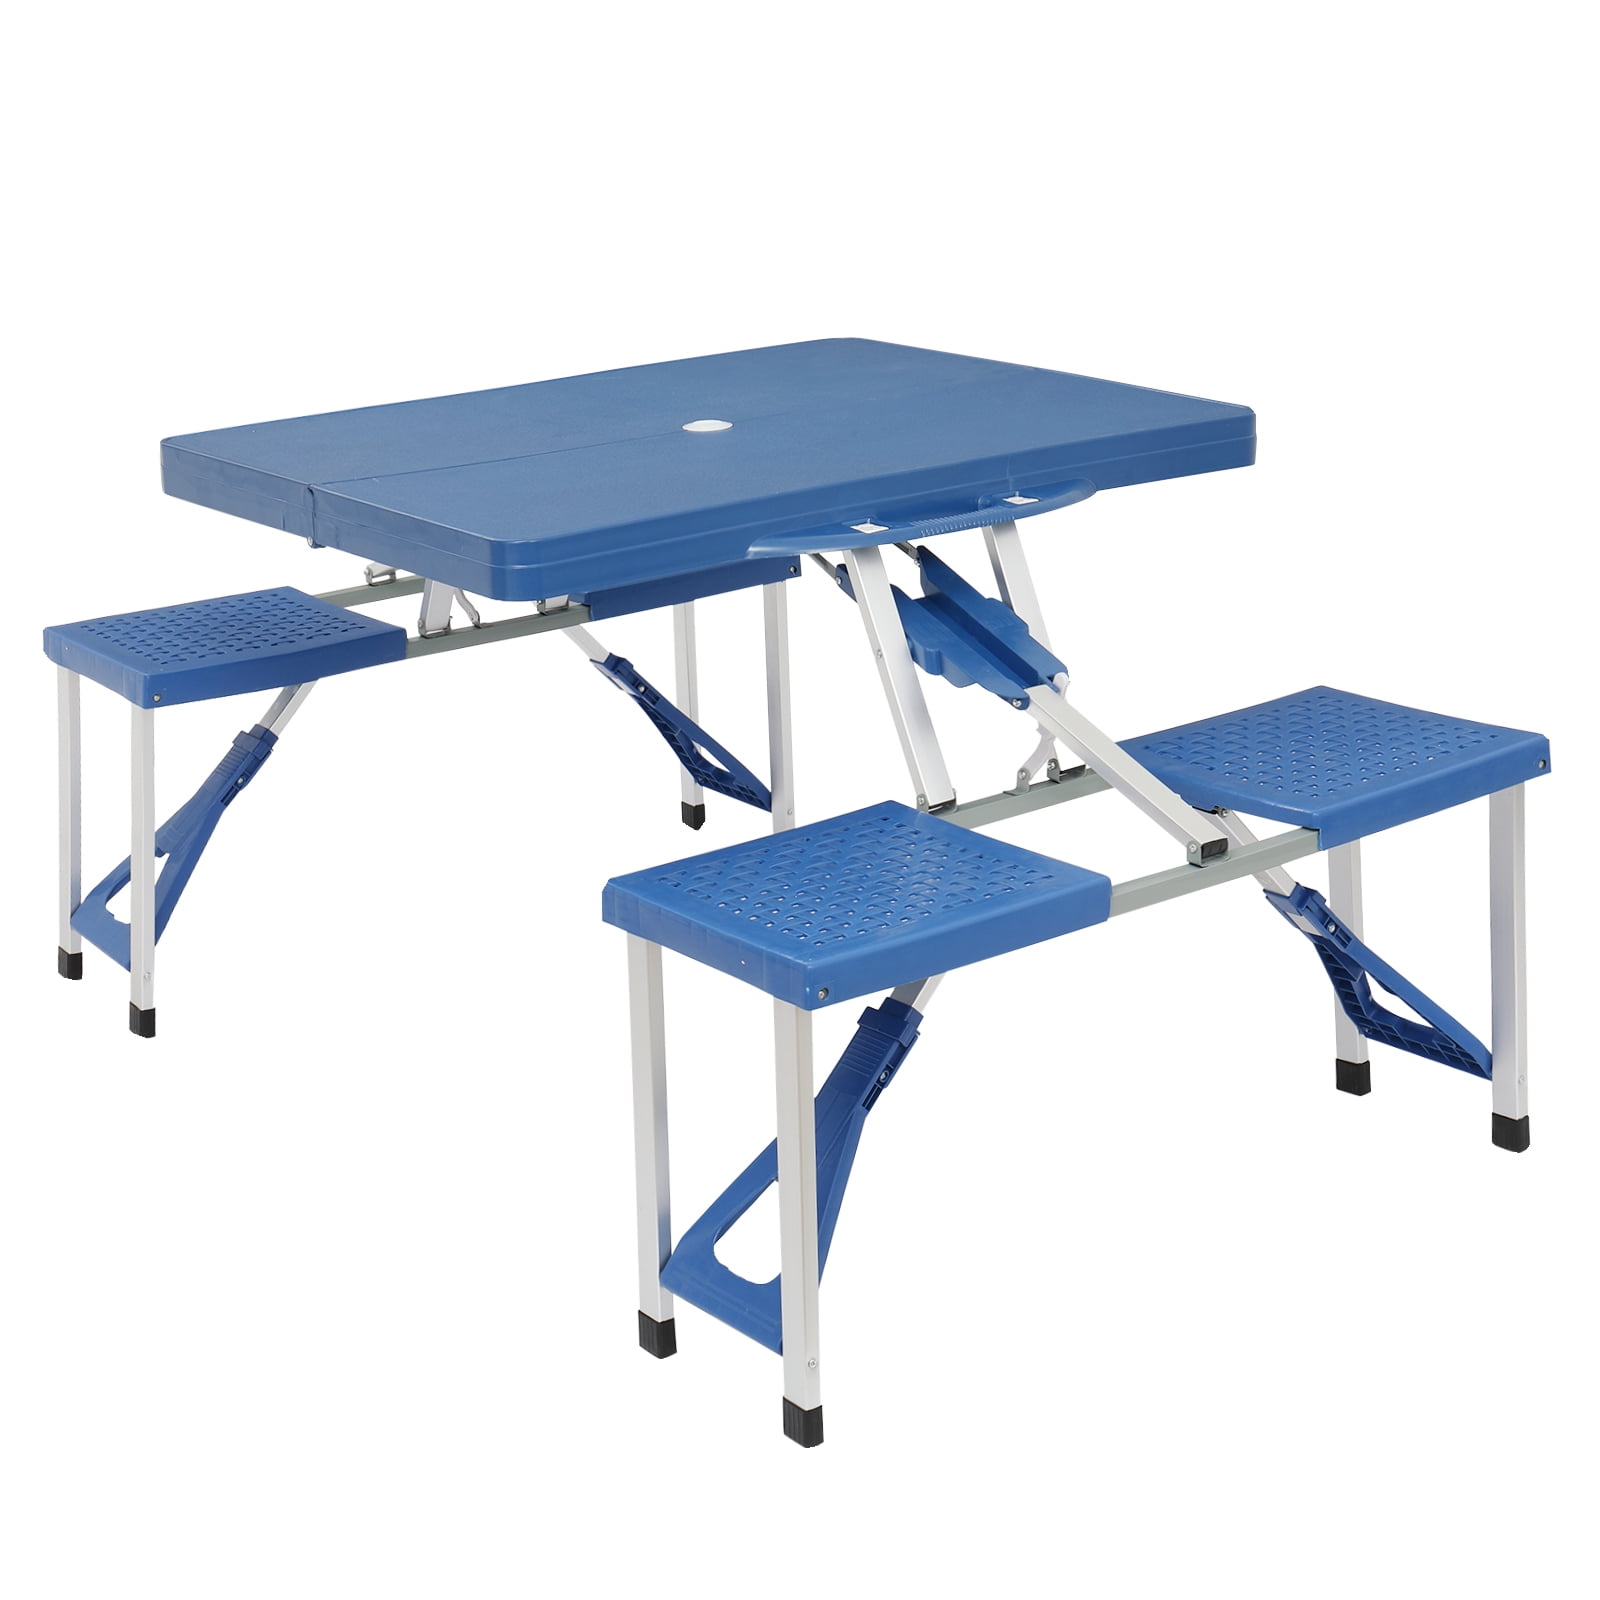 Portable Aluminum Folding Picnic Table Outdoor Lightweight BBQ Party Desk 